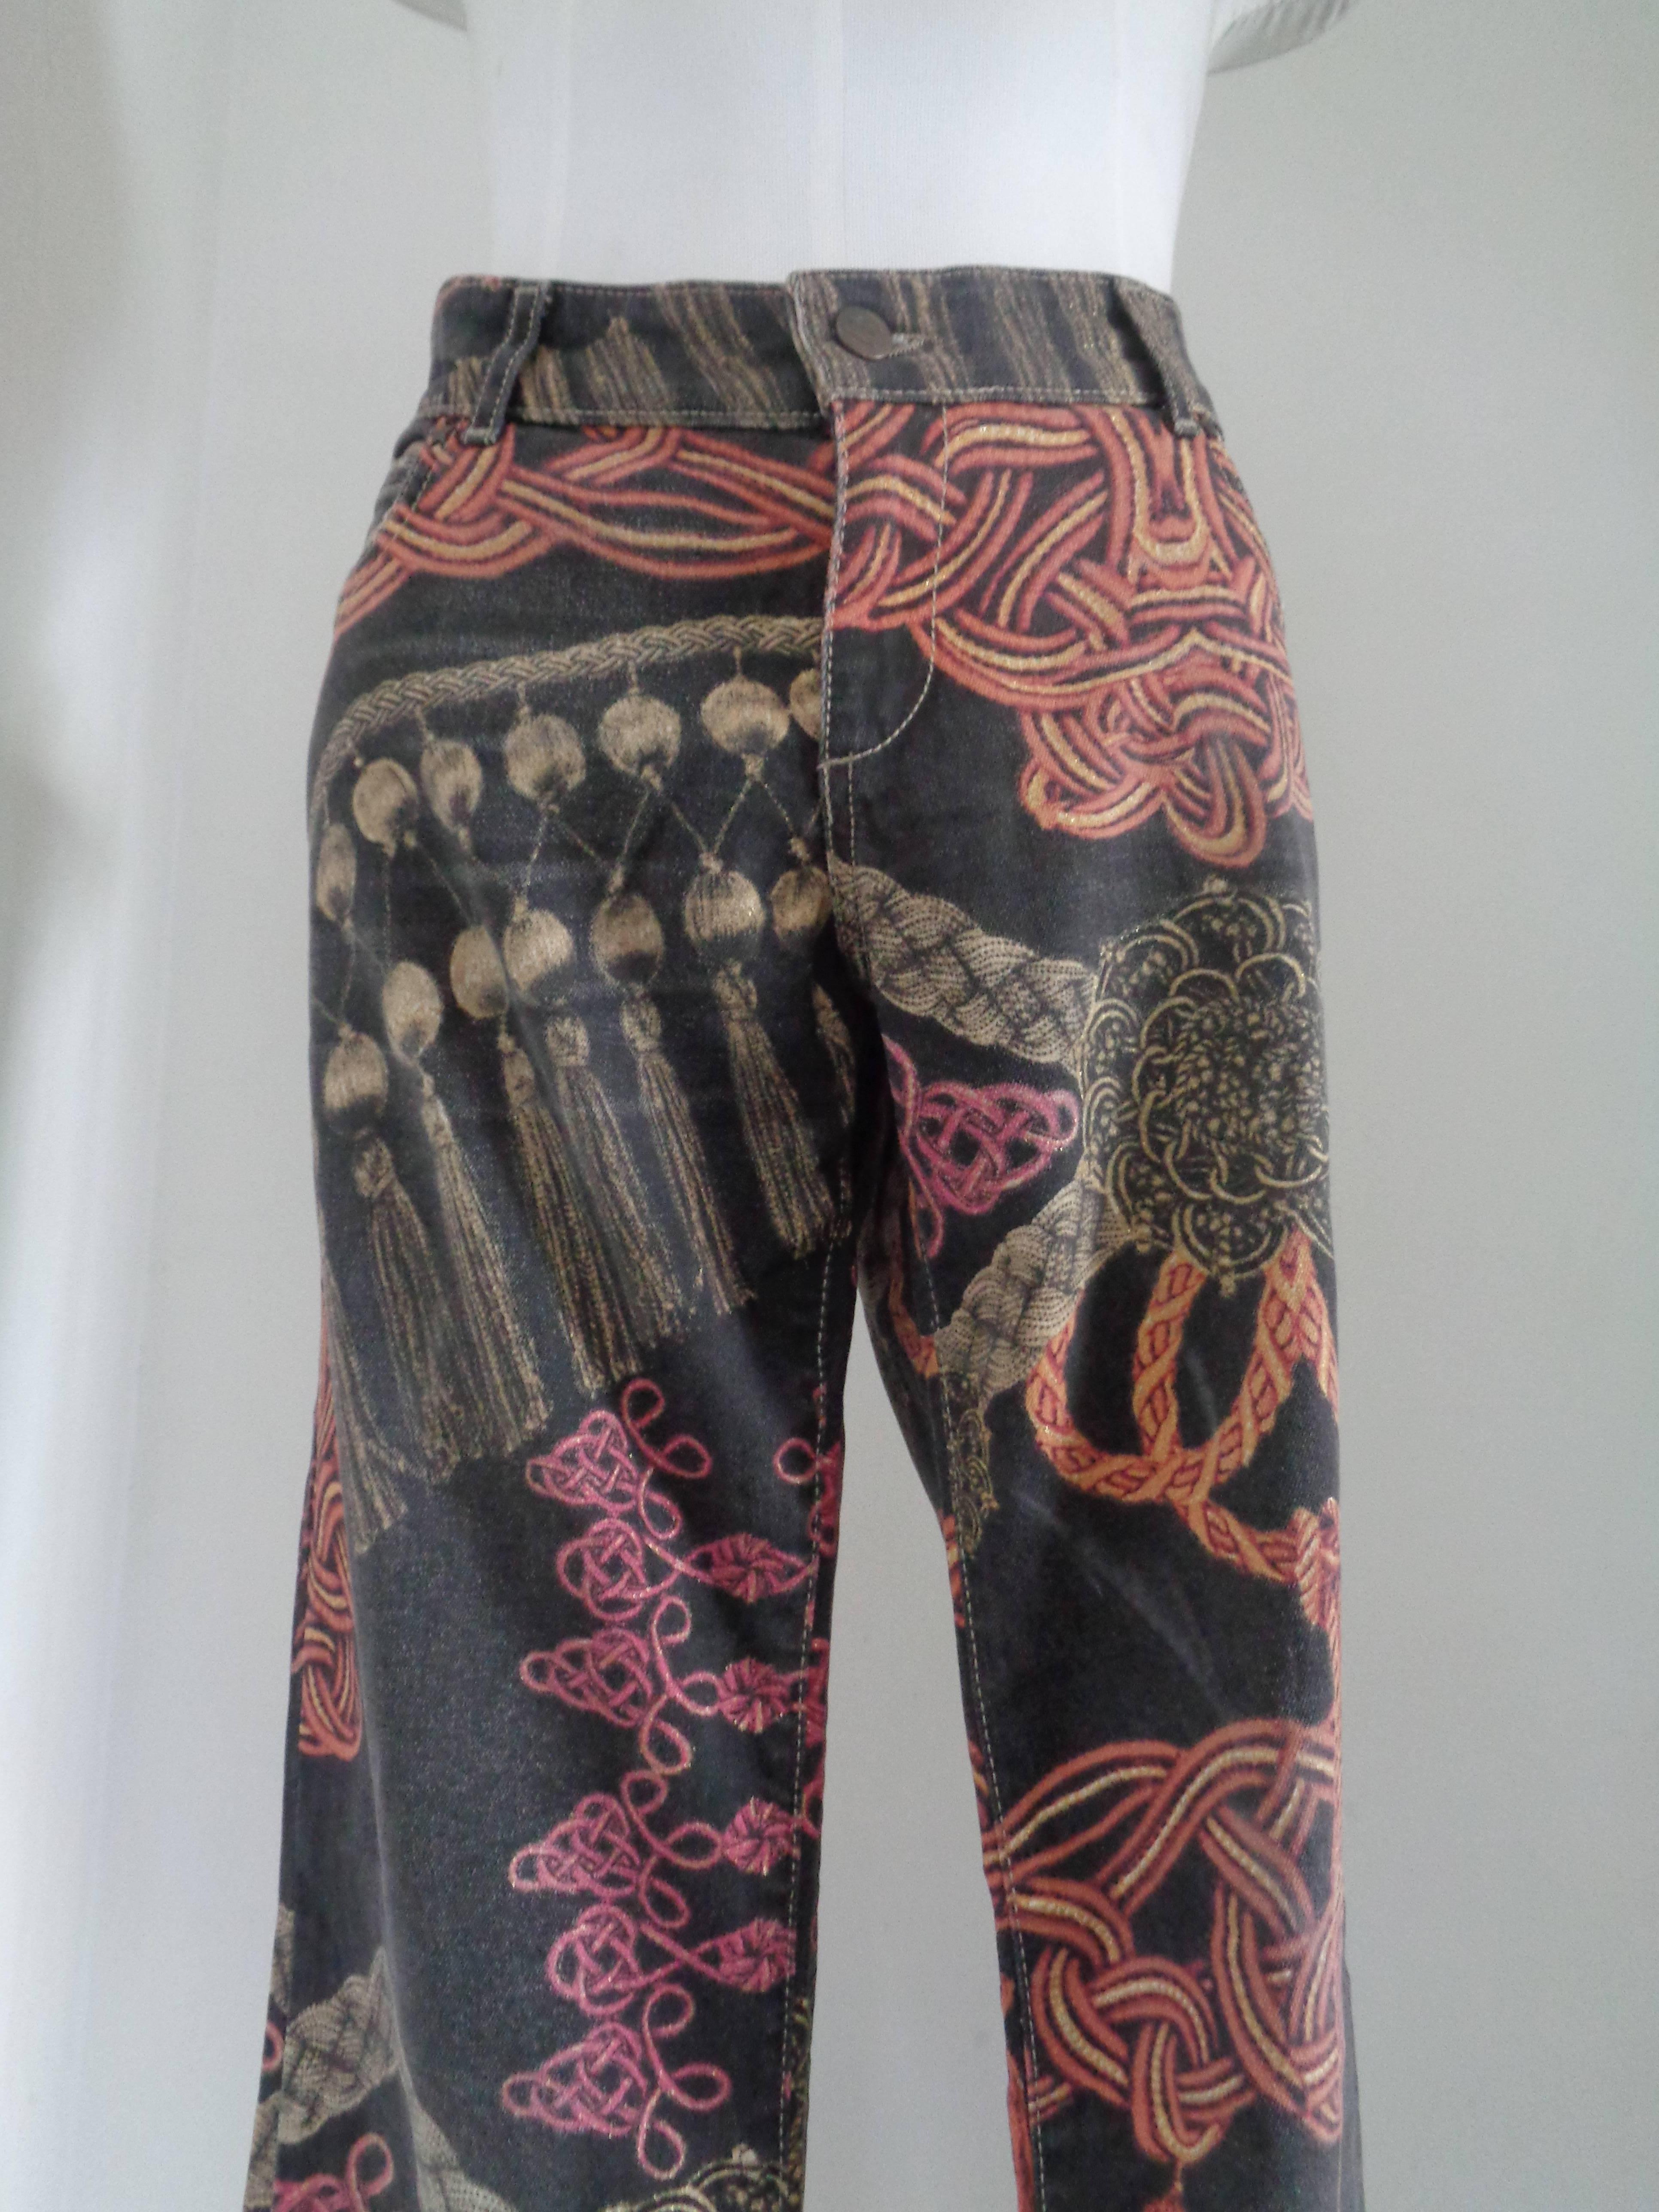 Roberto Cavalli Multicolour Pants

totally made in italy 
